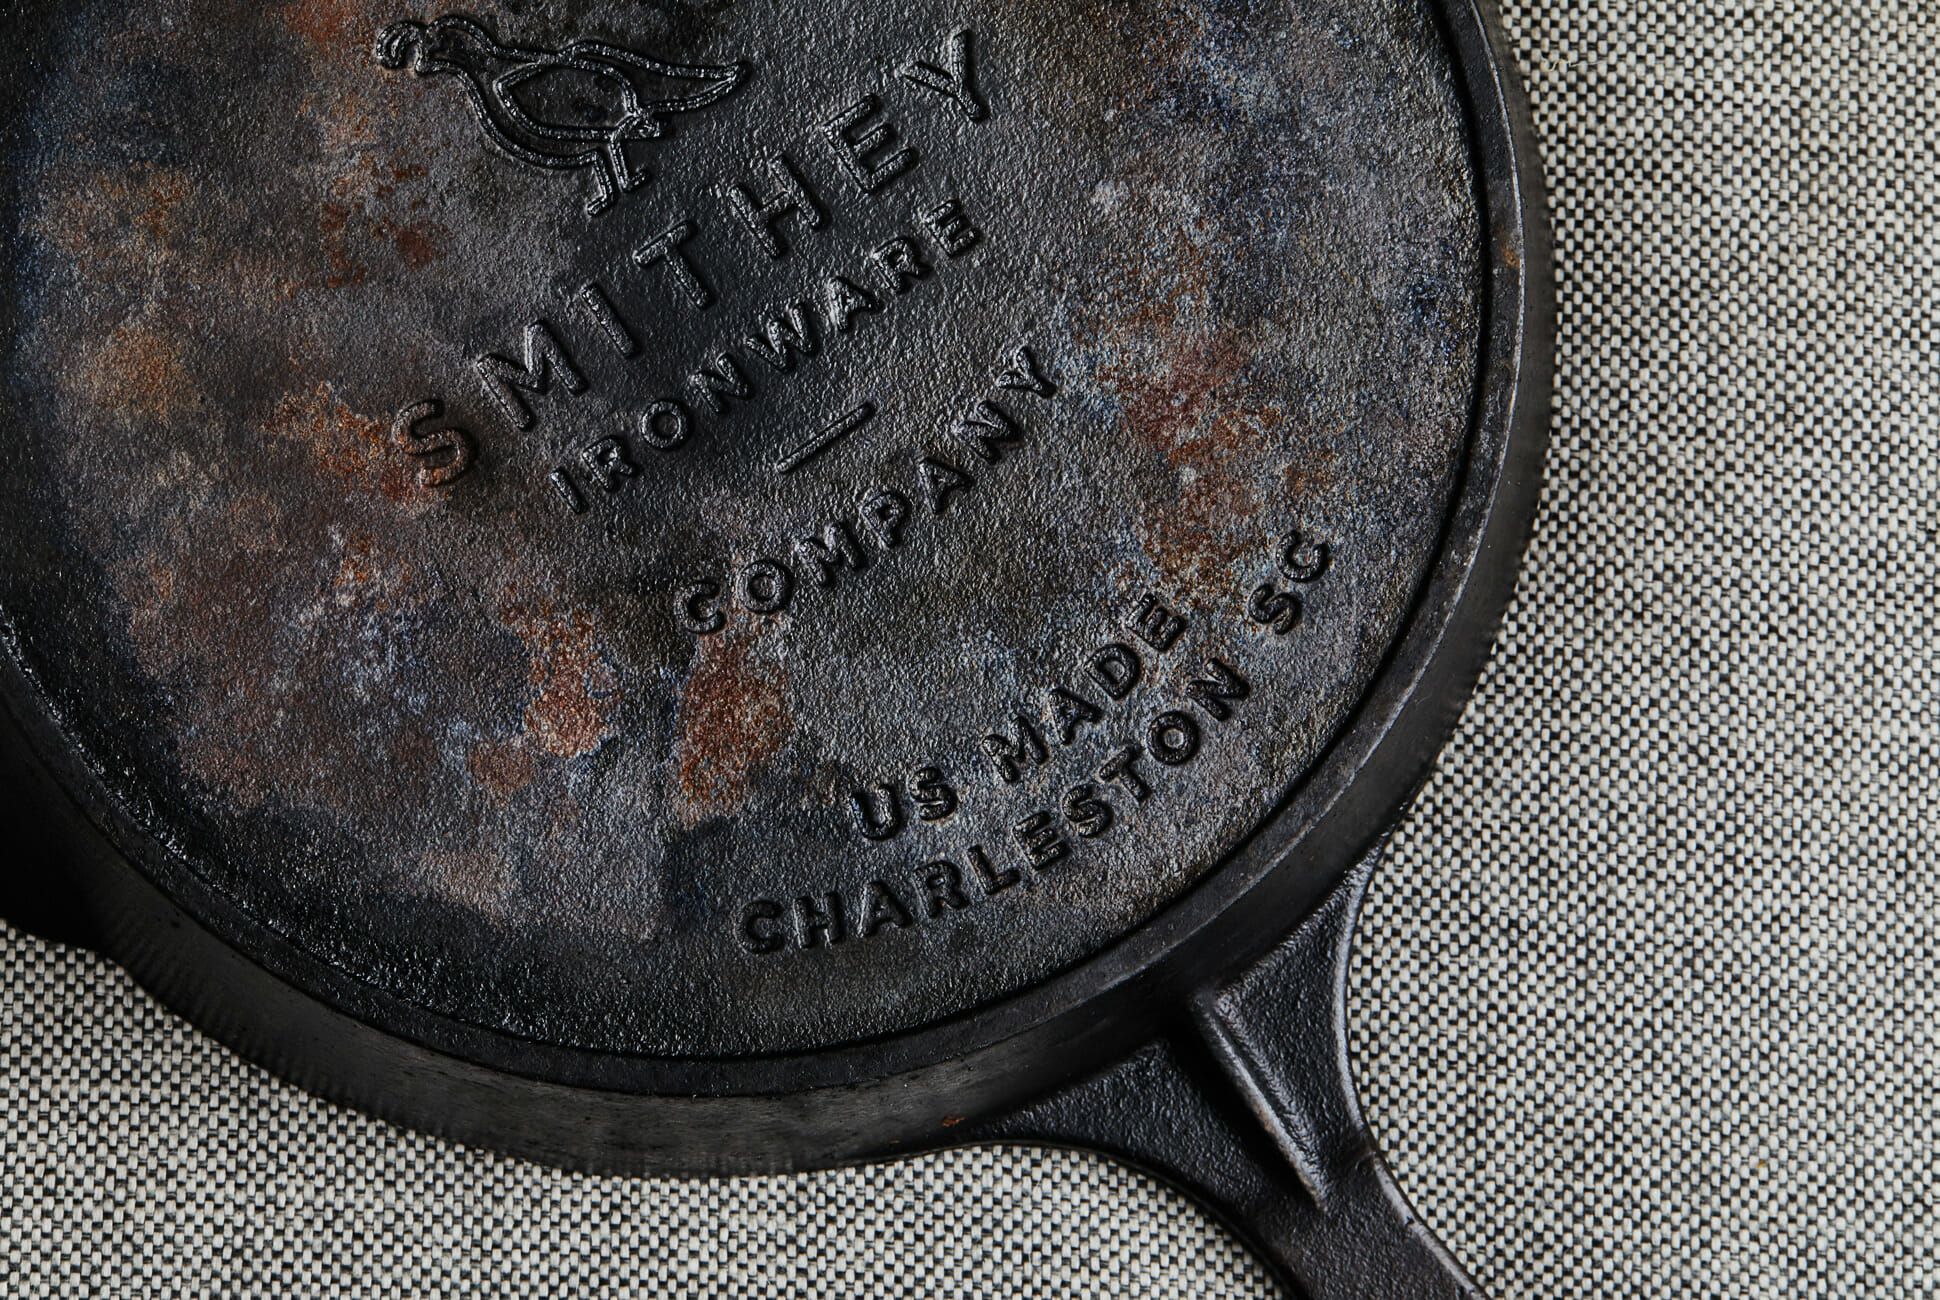 Griswold, Lodge and Wagner Cast Iron